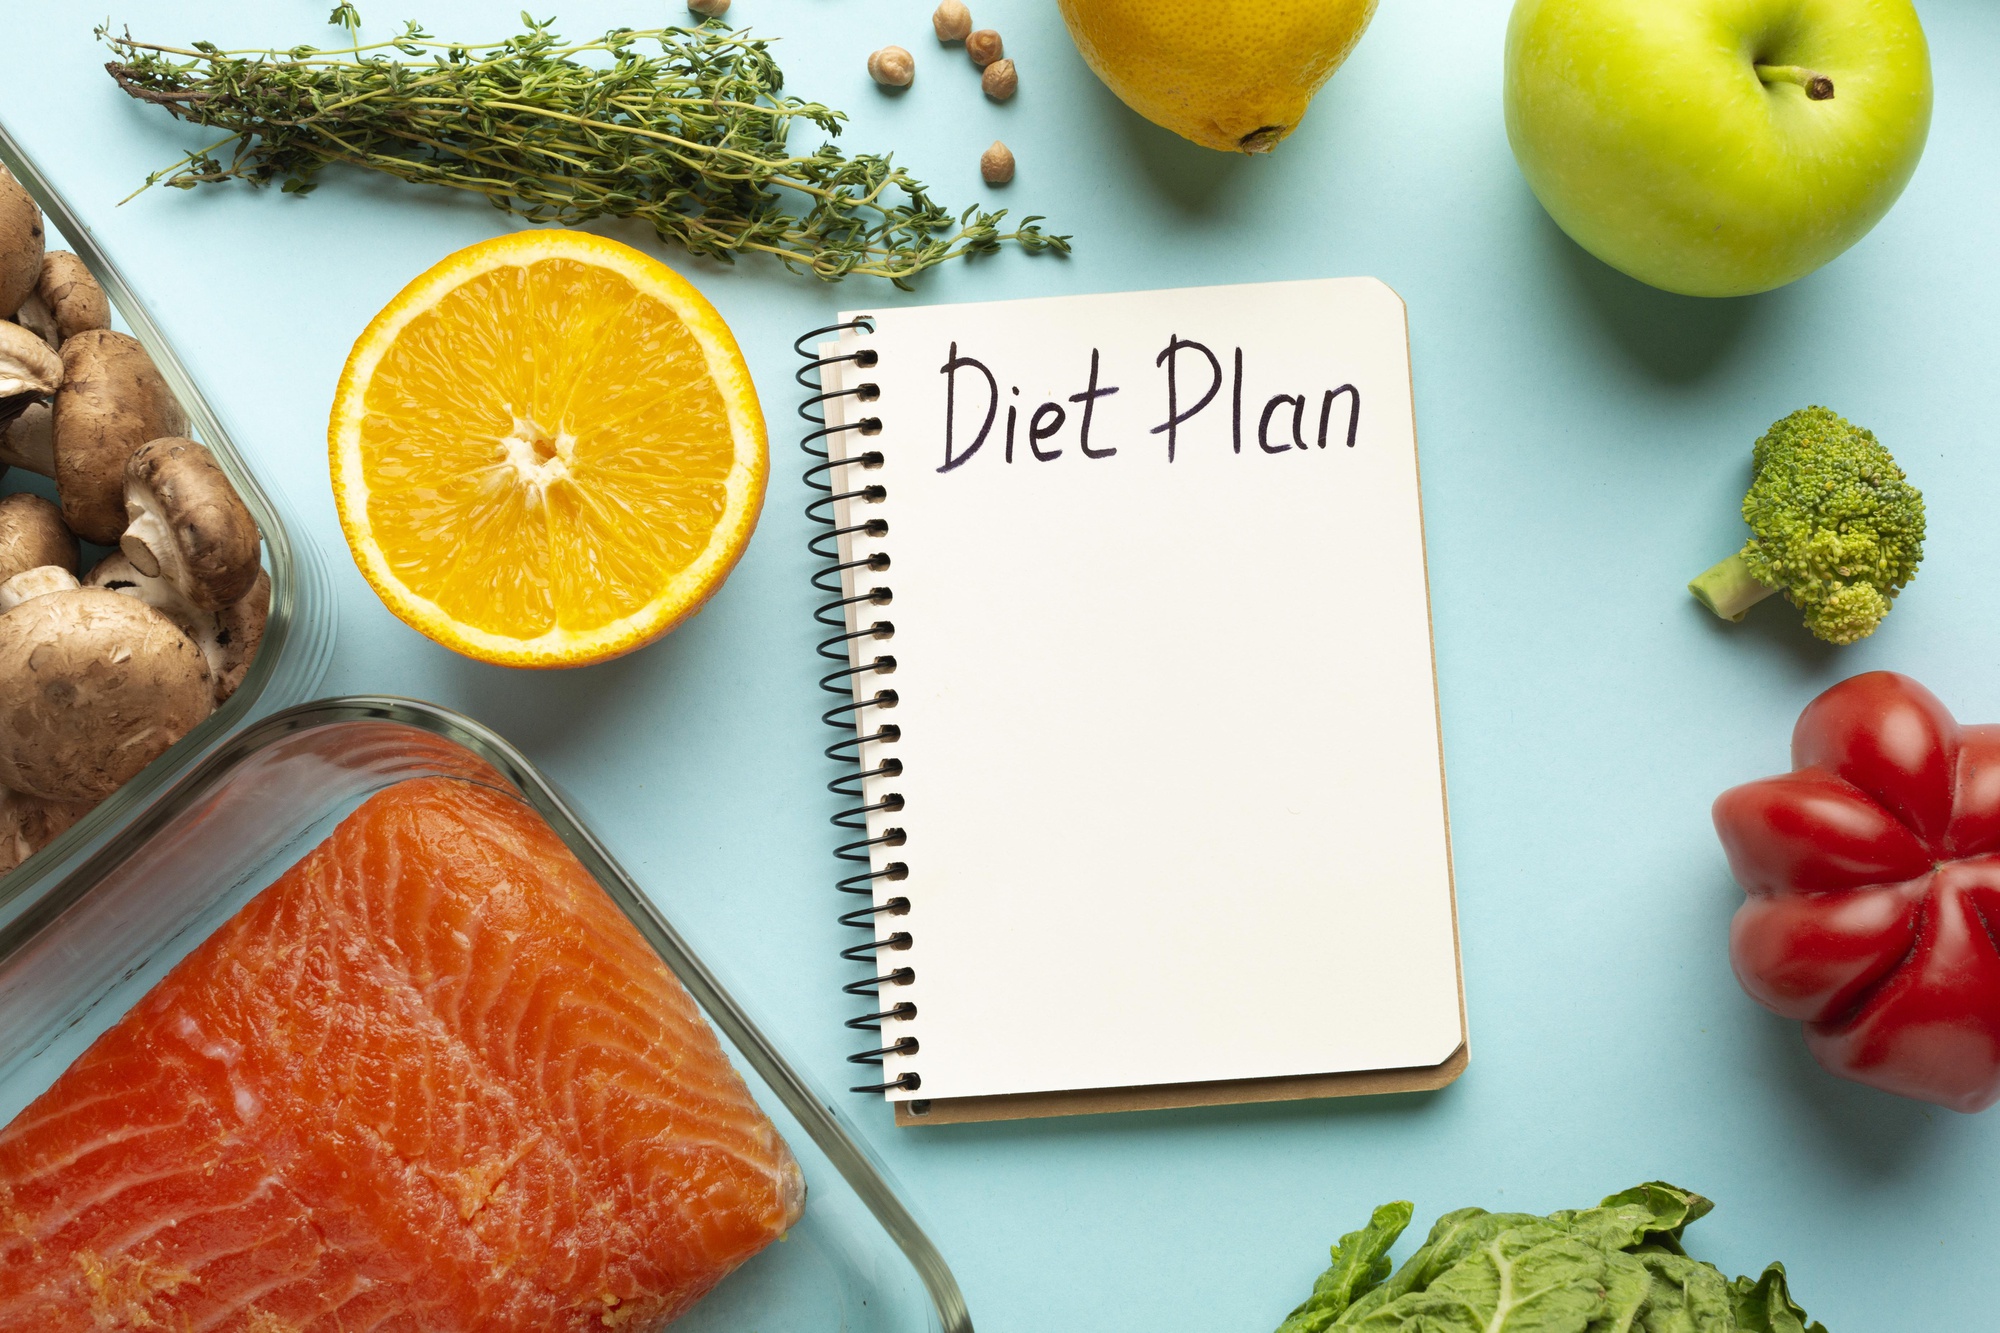 How To Lose Weight With A Healthy Diet Plan For Women